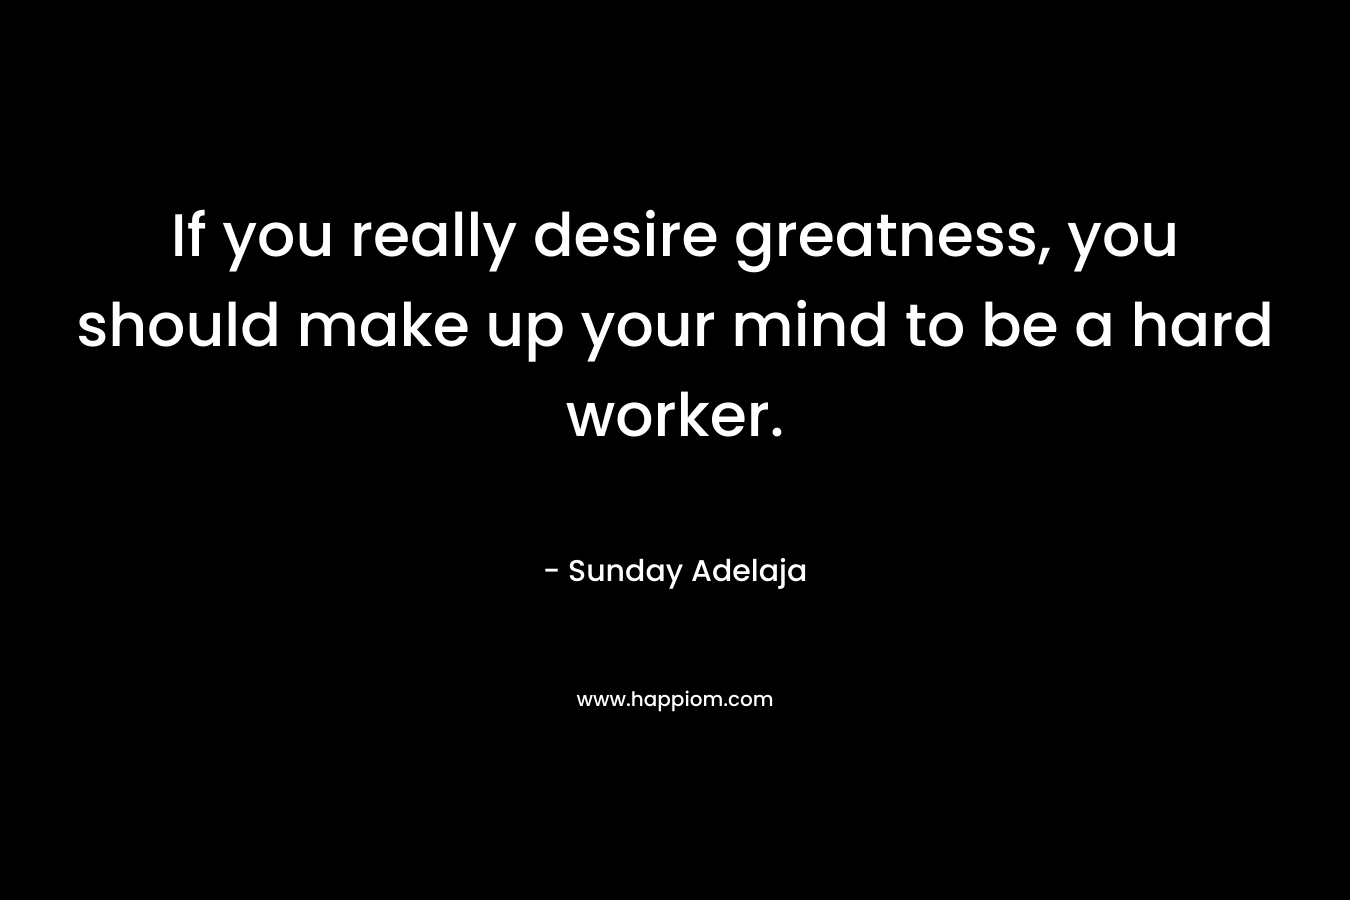 If you really desire greatness, you should make up your mind to be a hard worker.